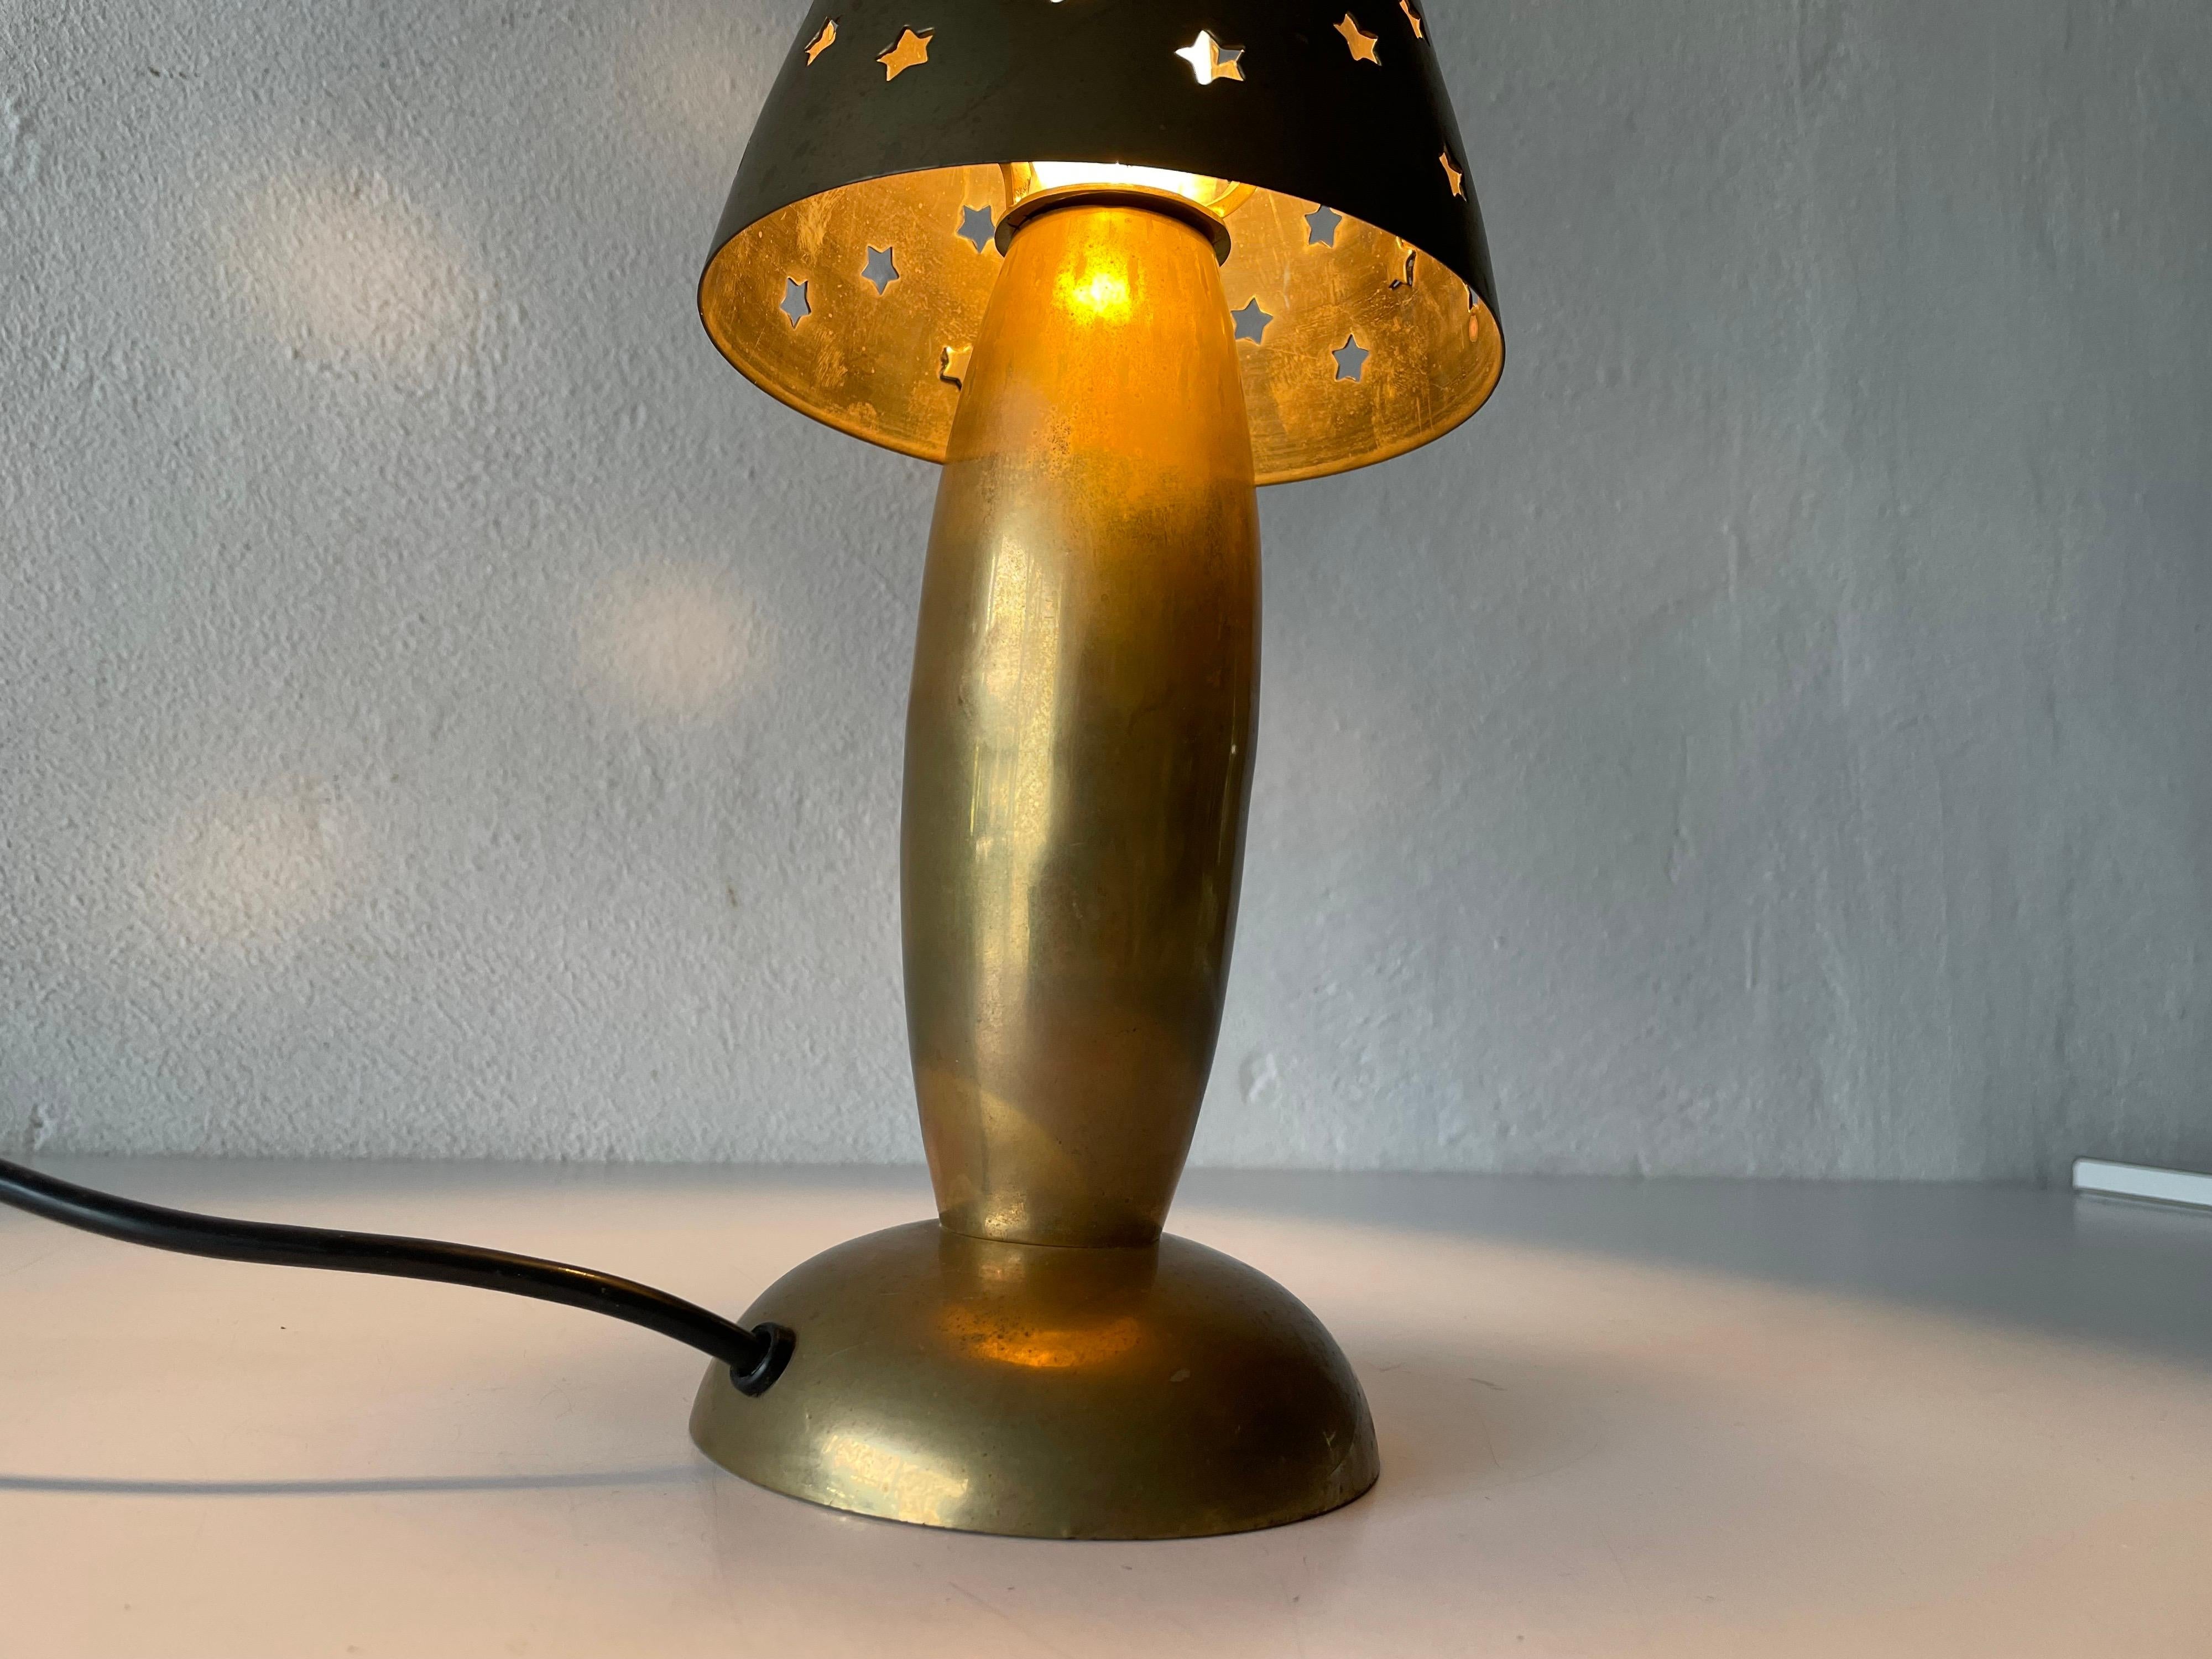 Heavy Full Brass Table Lamp by Gunther Lambert Collection, 1960s, Germany For Sale 7